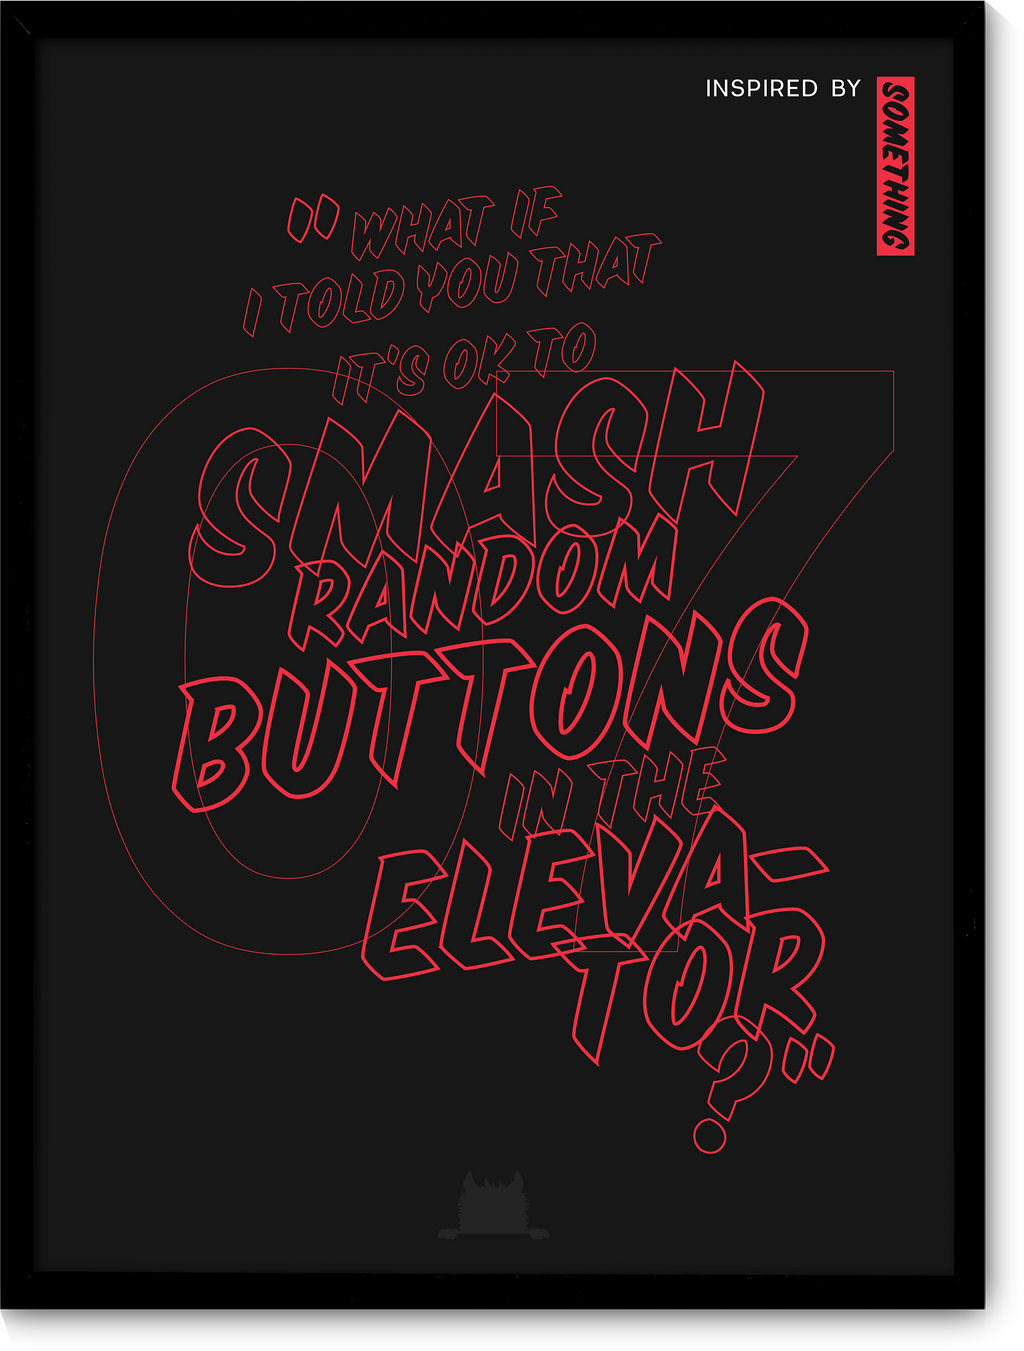 #07 Inspired by a meme: "What if I told you that it's ok to smash random buttons in the elevator?"